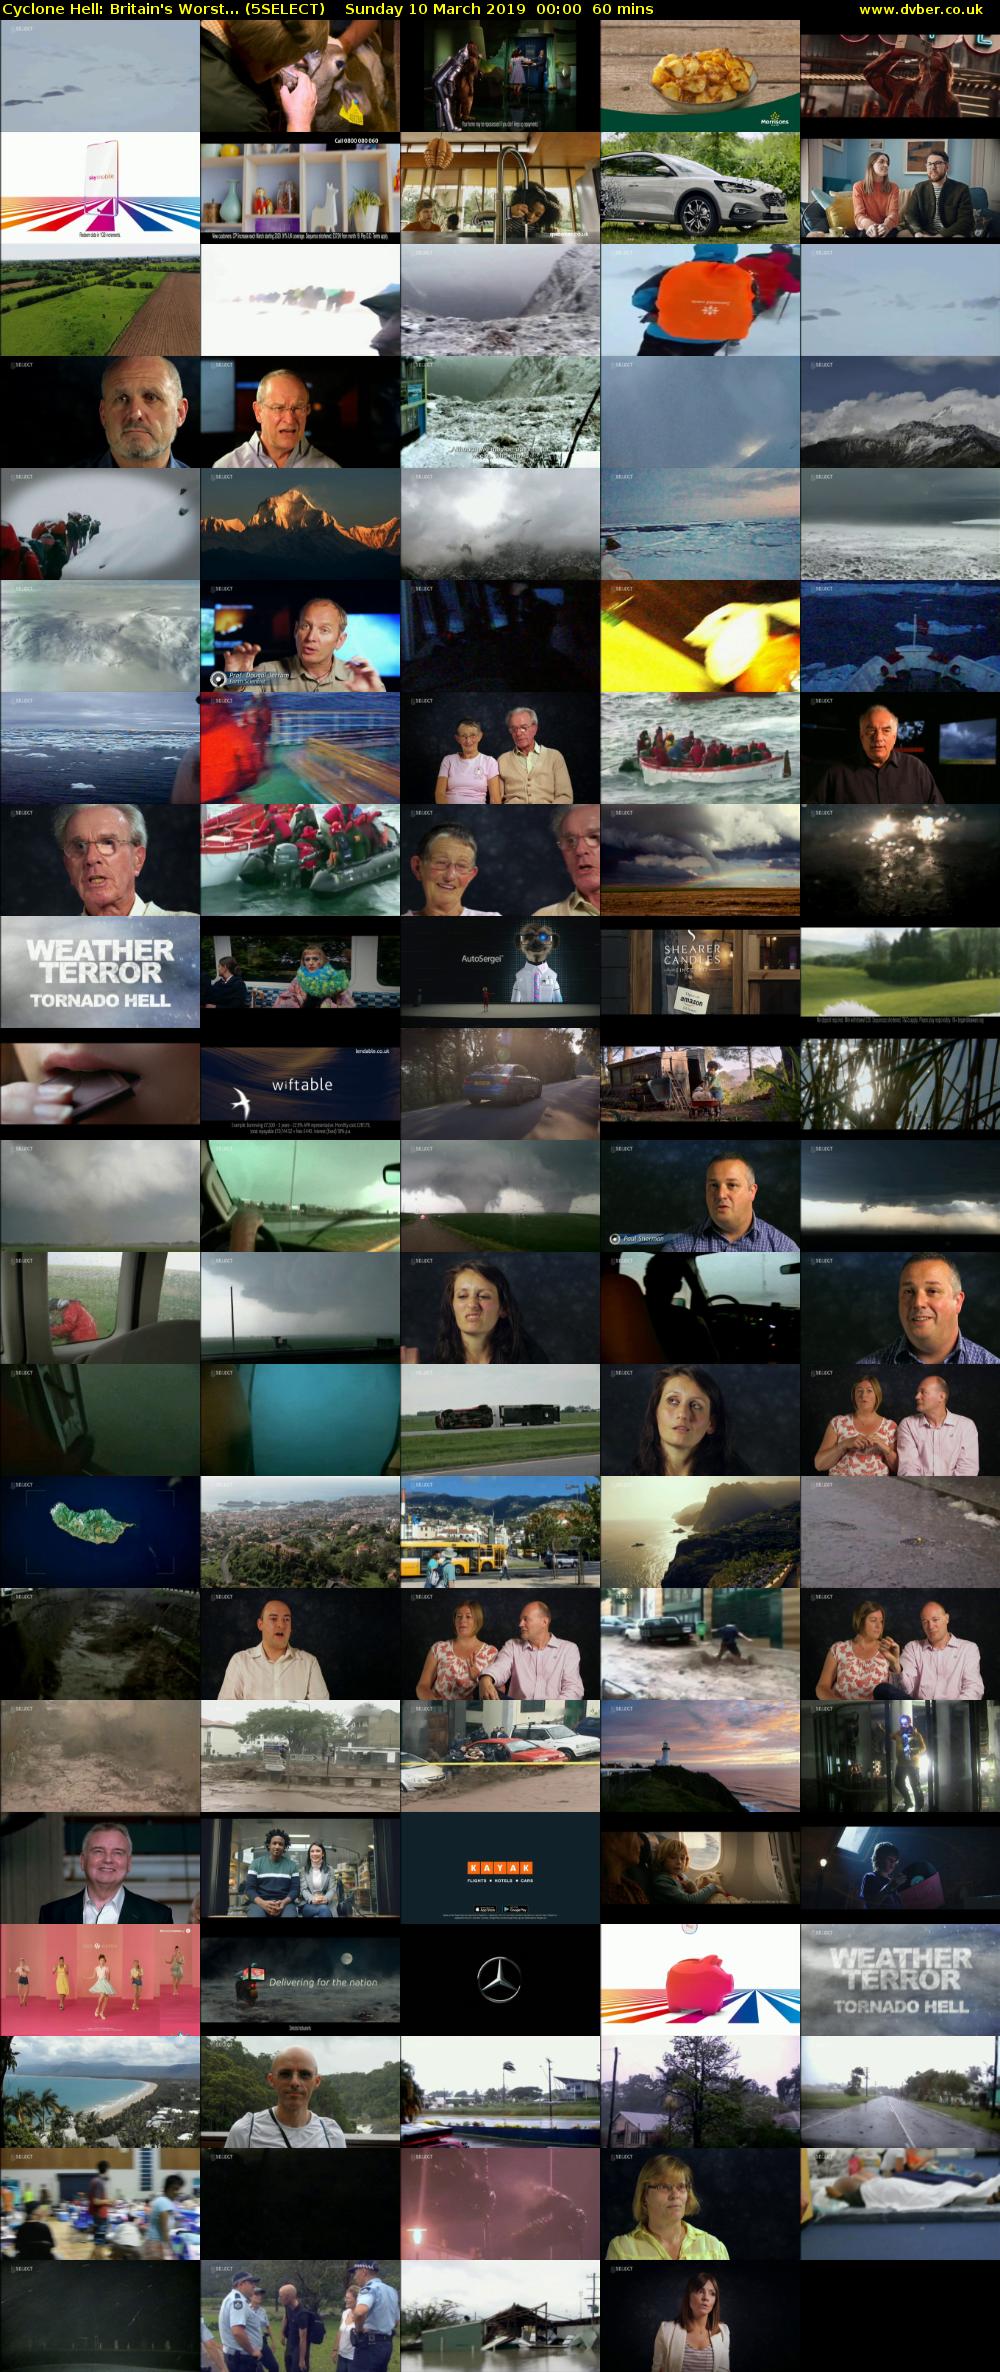 Cyclone Hell: Britain's Worst... (5SELECT) Sunday 10 March 2019 00:00 - 01:00